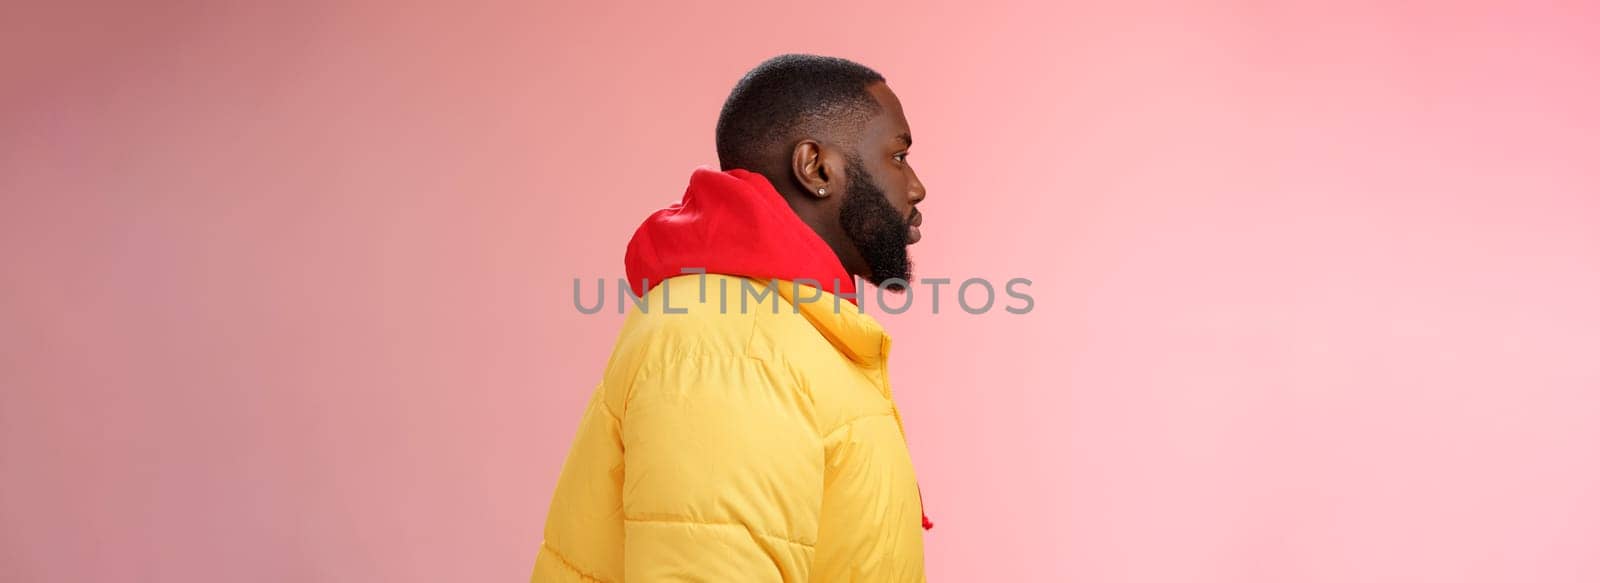 Profile studio shot bearded young 25s african guy in yellow jacket red hoodie look left normal unbothered relaxed expression standing queue order fastfood pink background, waiting take-away.